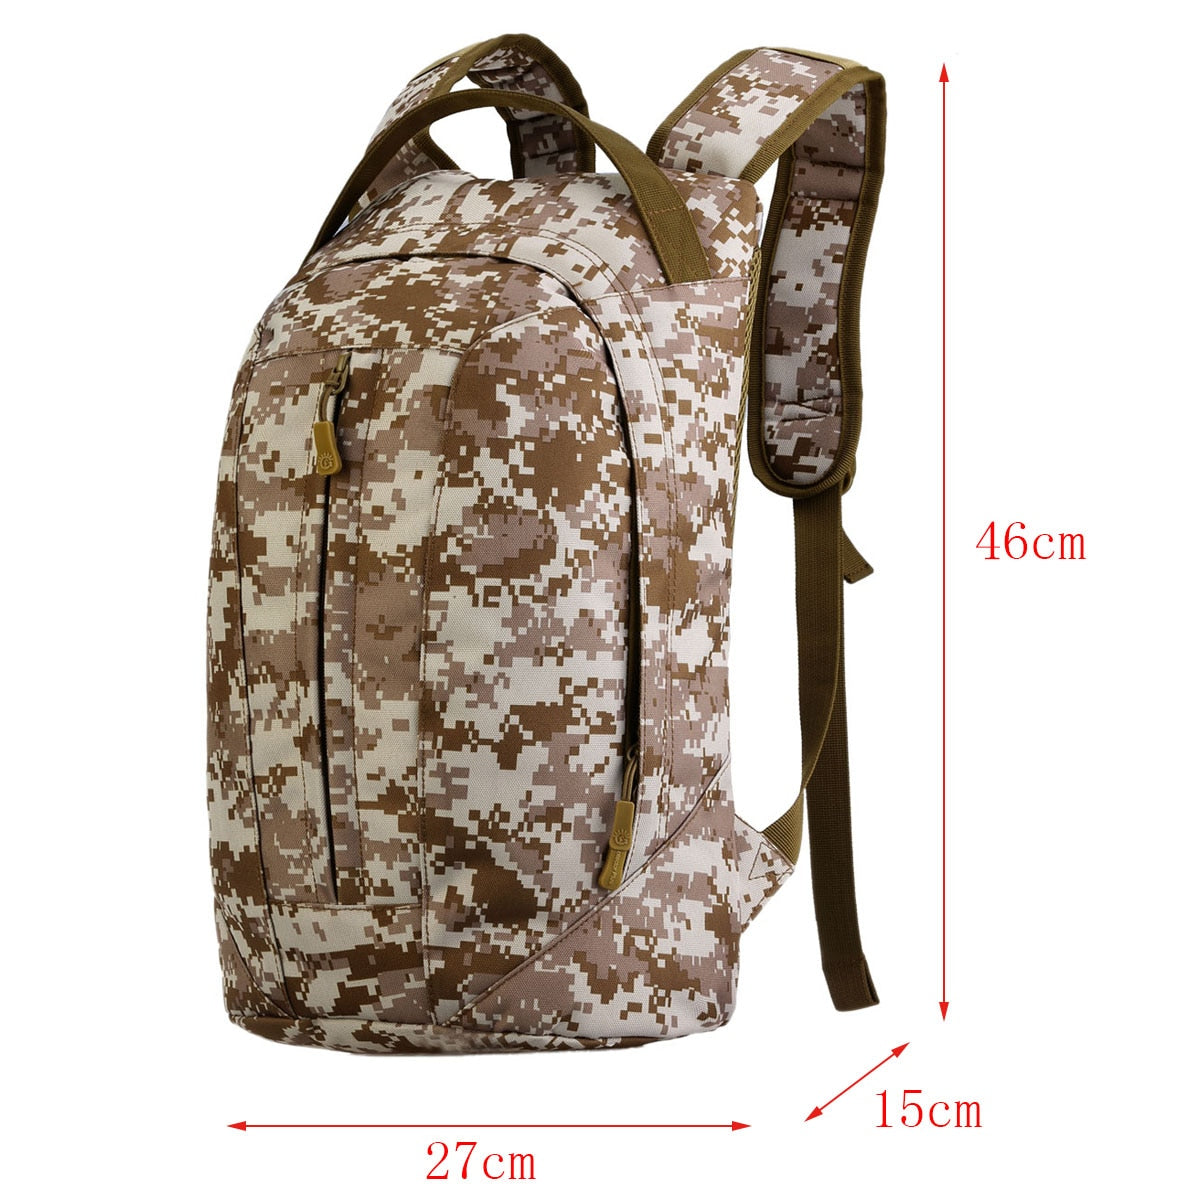 Protector Plus 25L Outdoor Backpack Rucksacks Sports Bag For Camping Hiking Hunting Bags S424 - ebowsos